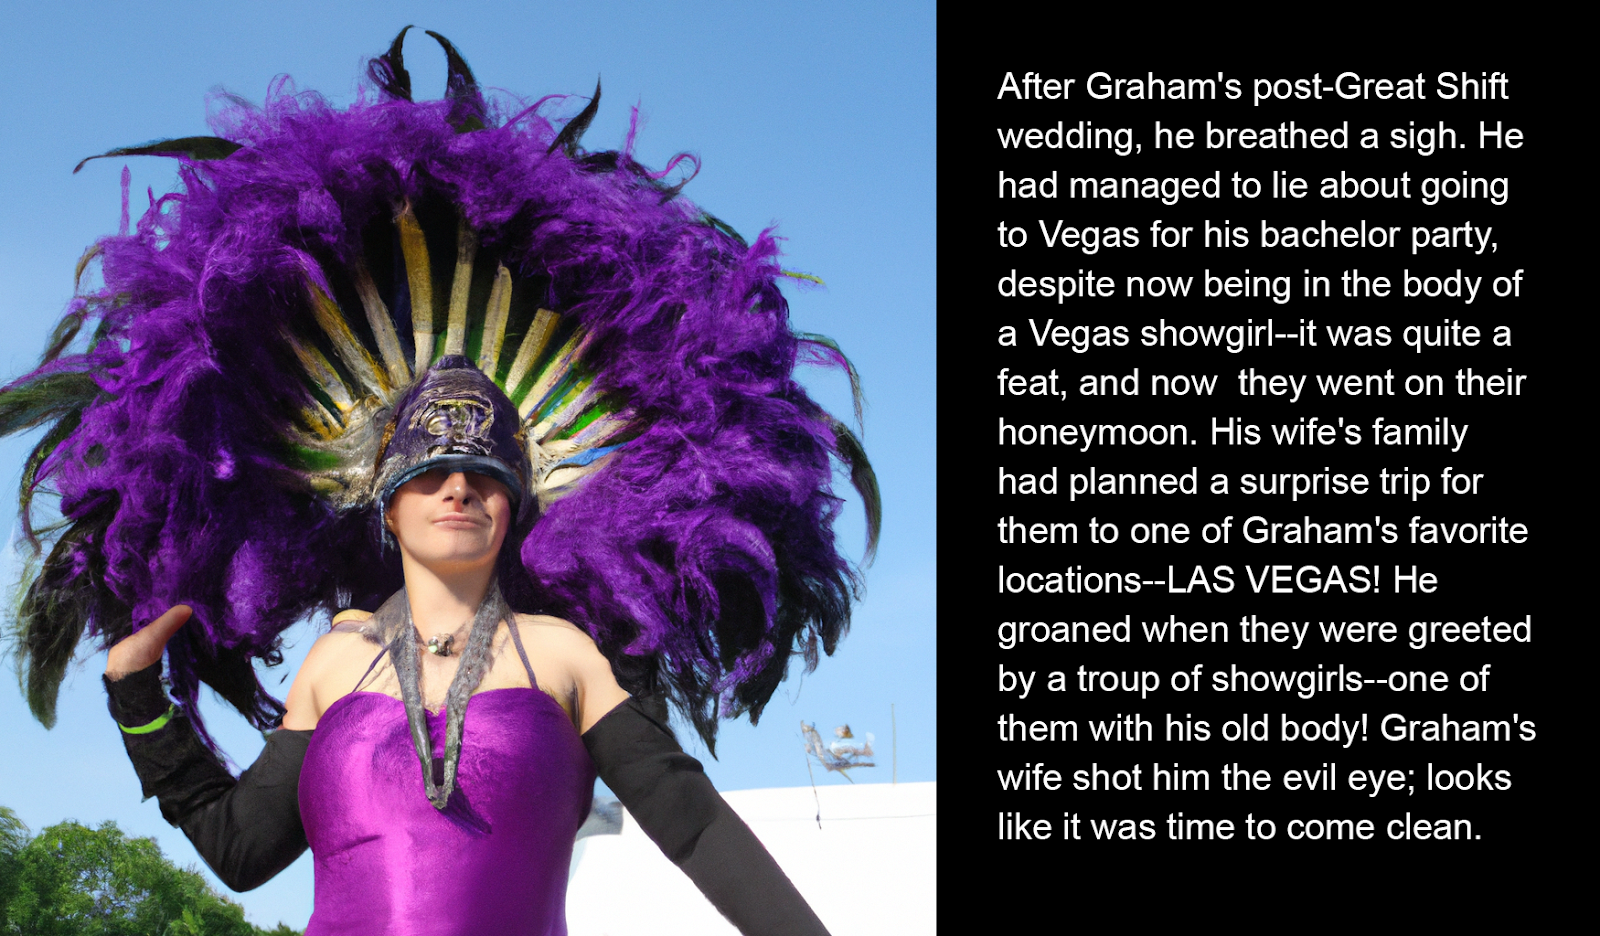 After Graham's post-Great Shift wedding, he breathed a sigh. He had managed to lie about going to Vegas for his bachelor party, despite now being in the body of a Vegas showgirl--it was quite a feat, and now  they went on their honeymoon. His wife's family had planned a surprise trip for them to one of Graham's favorite locations--LAS VEGAS! He groaned when they were greeted by a troup of showgirls--one of them with his old body! Graham's wife shot him the evil eye; looks like it was time to come clean.